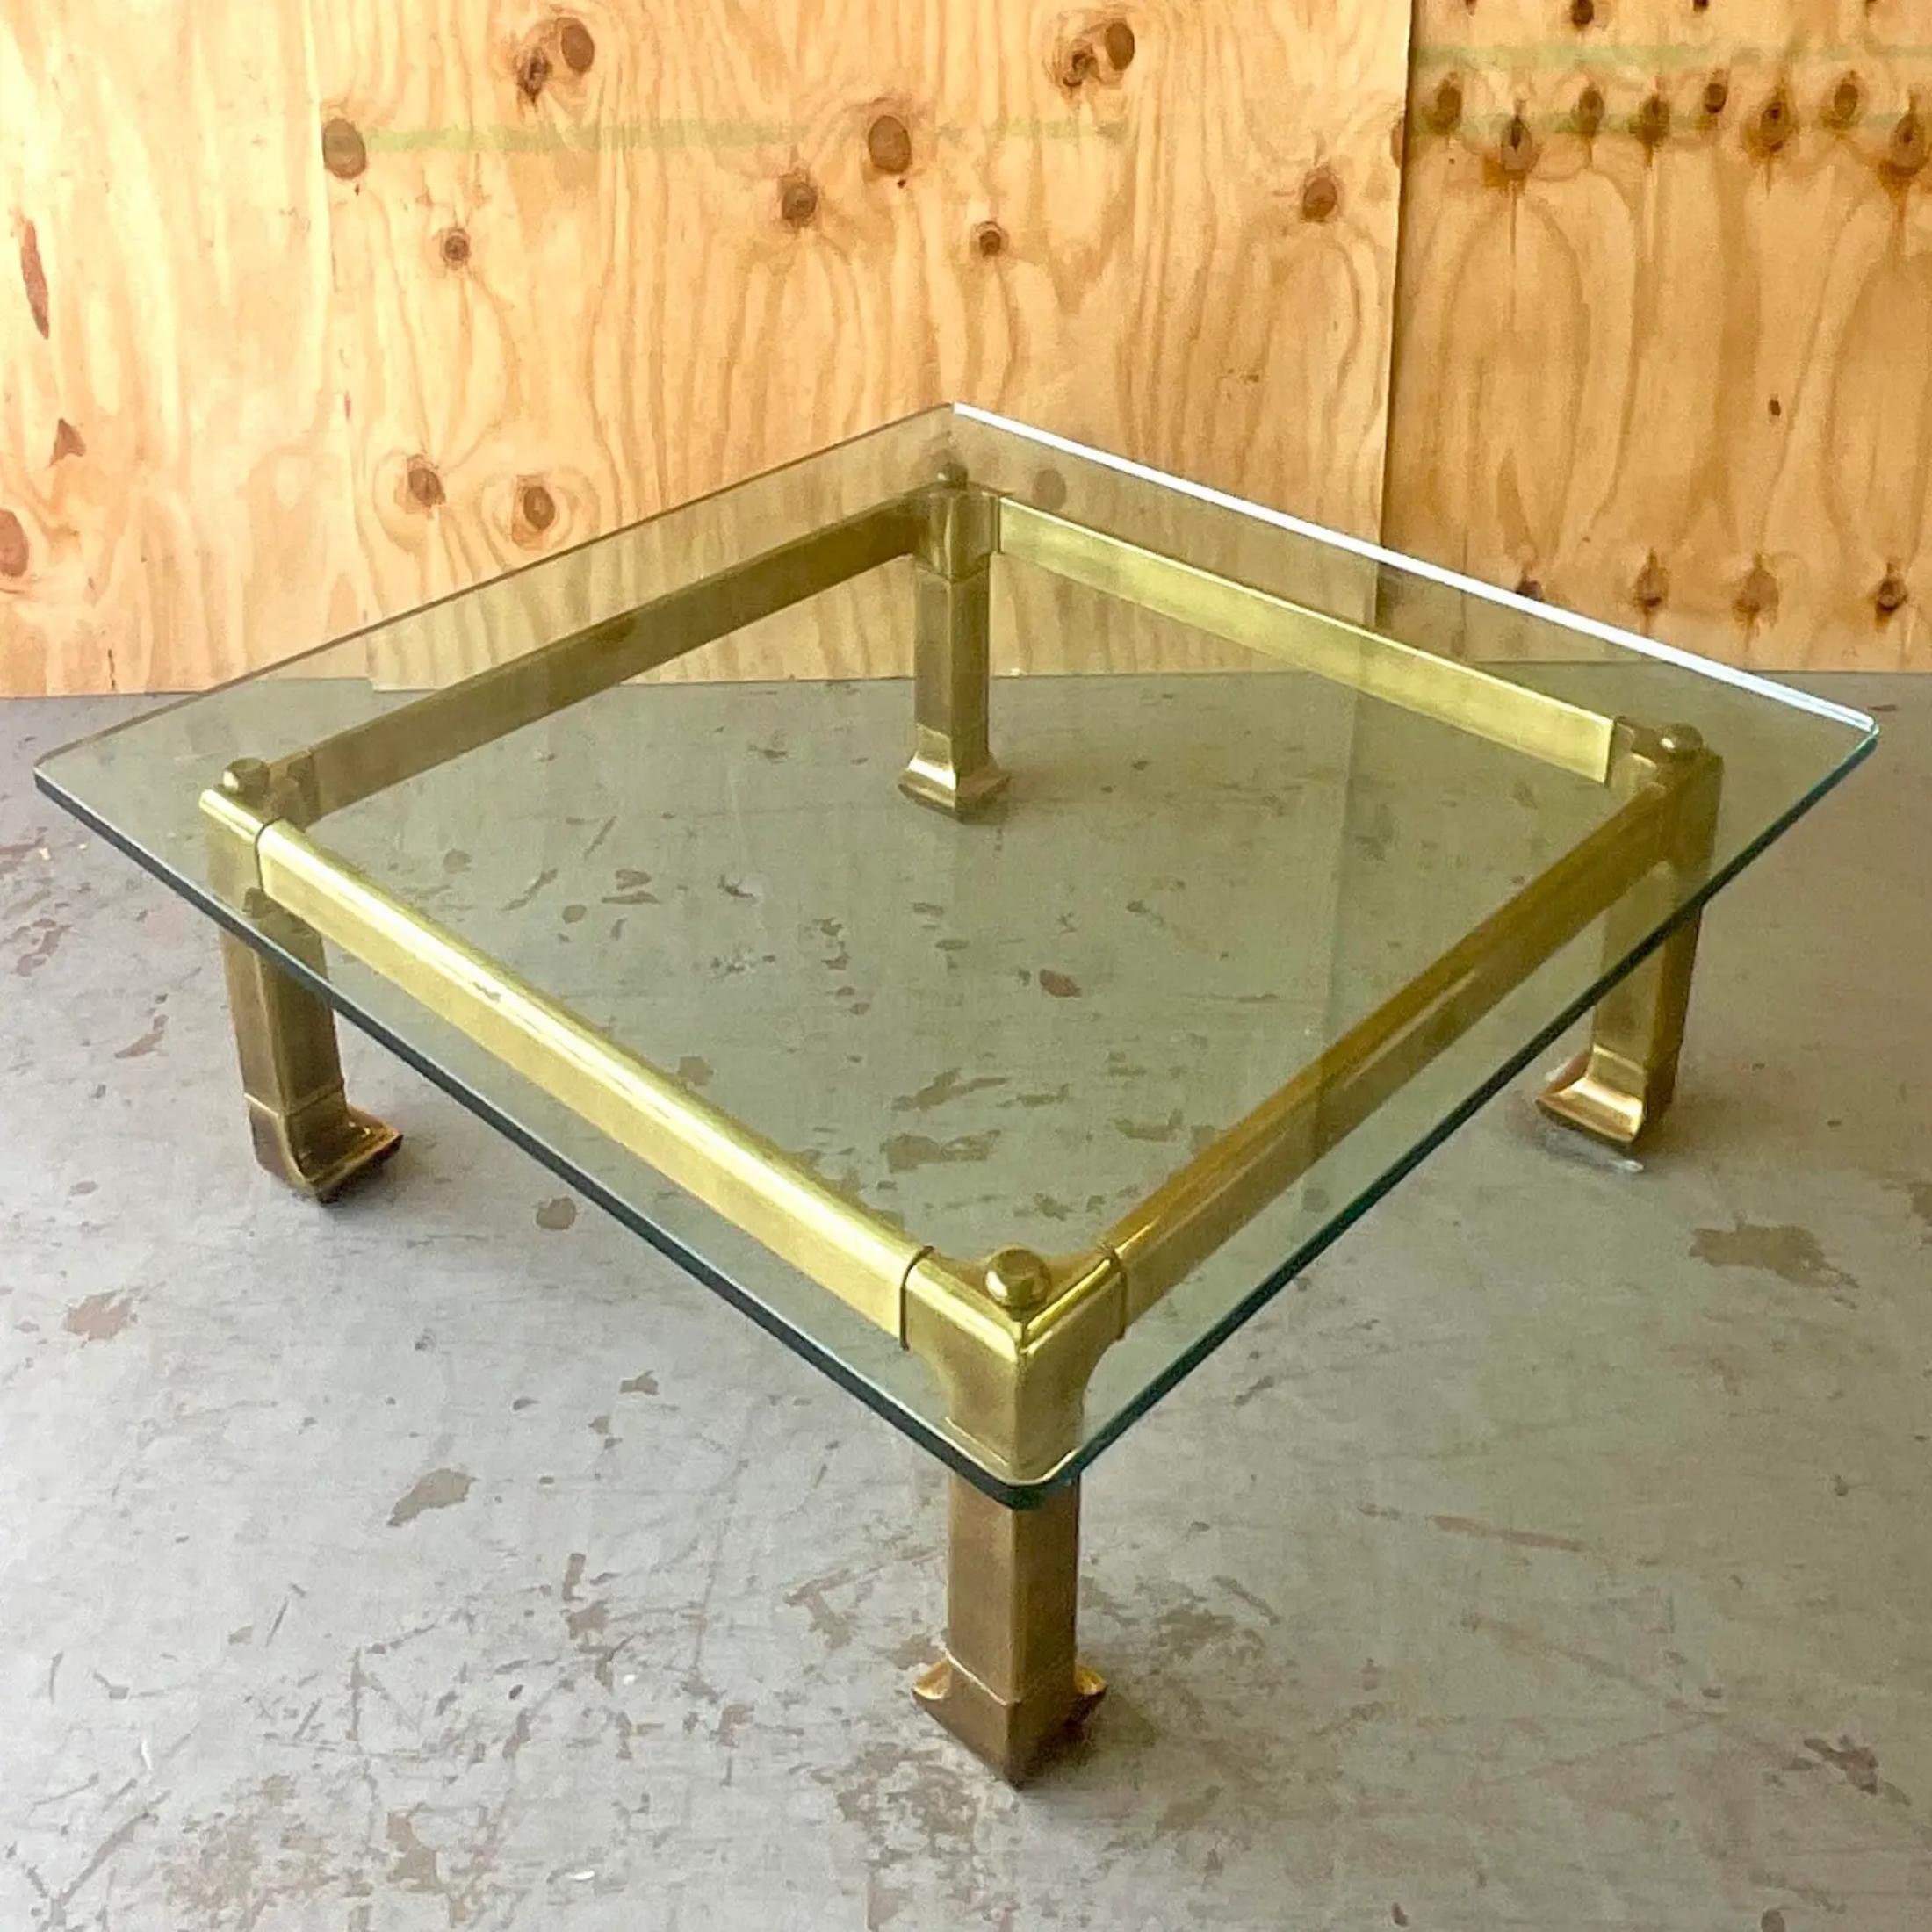 A stunning vintage Regency coffee table. A chic brass frame with thick glass top done in the manner of Mastercraft. Acquired from a Palm Beach estate.